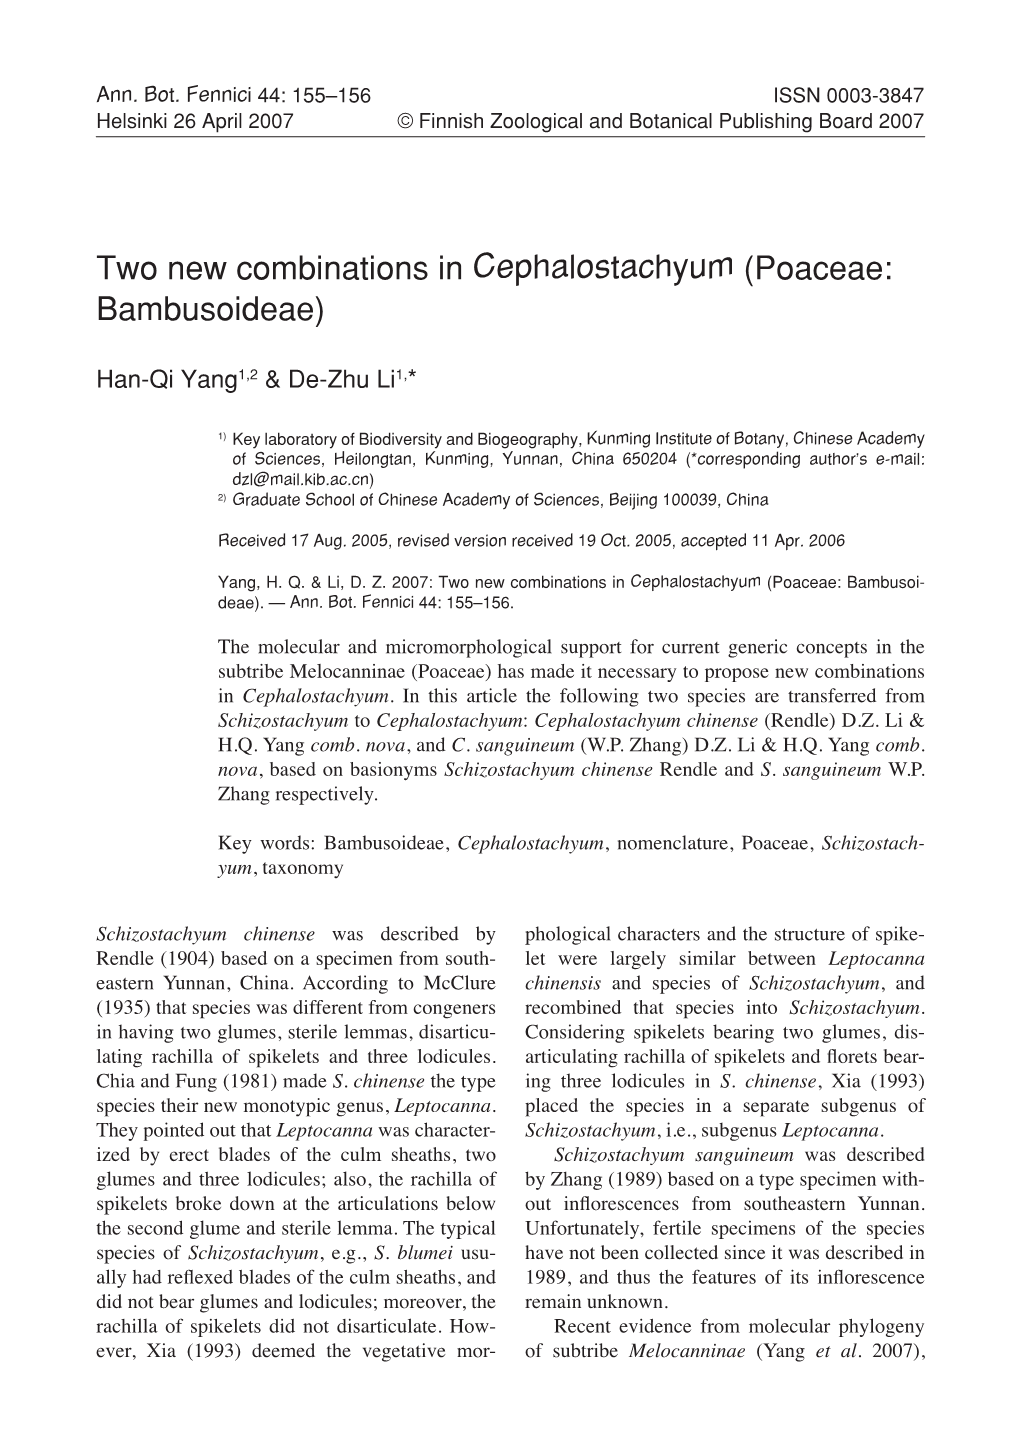 Two New Combinations in Cephalostachyum (Poaceae: Bambusoideae)